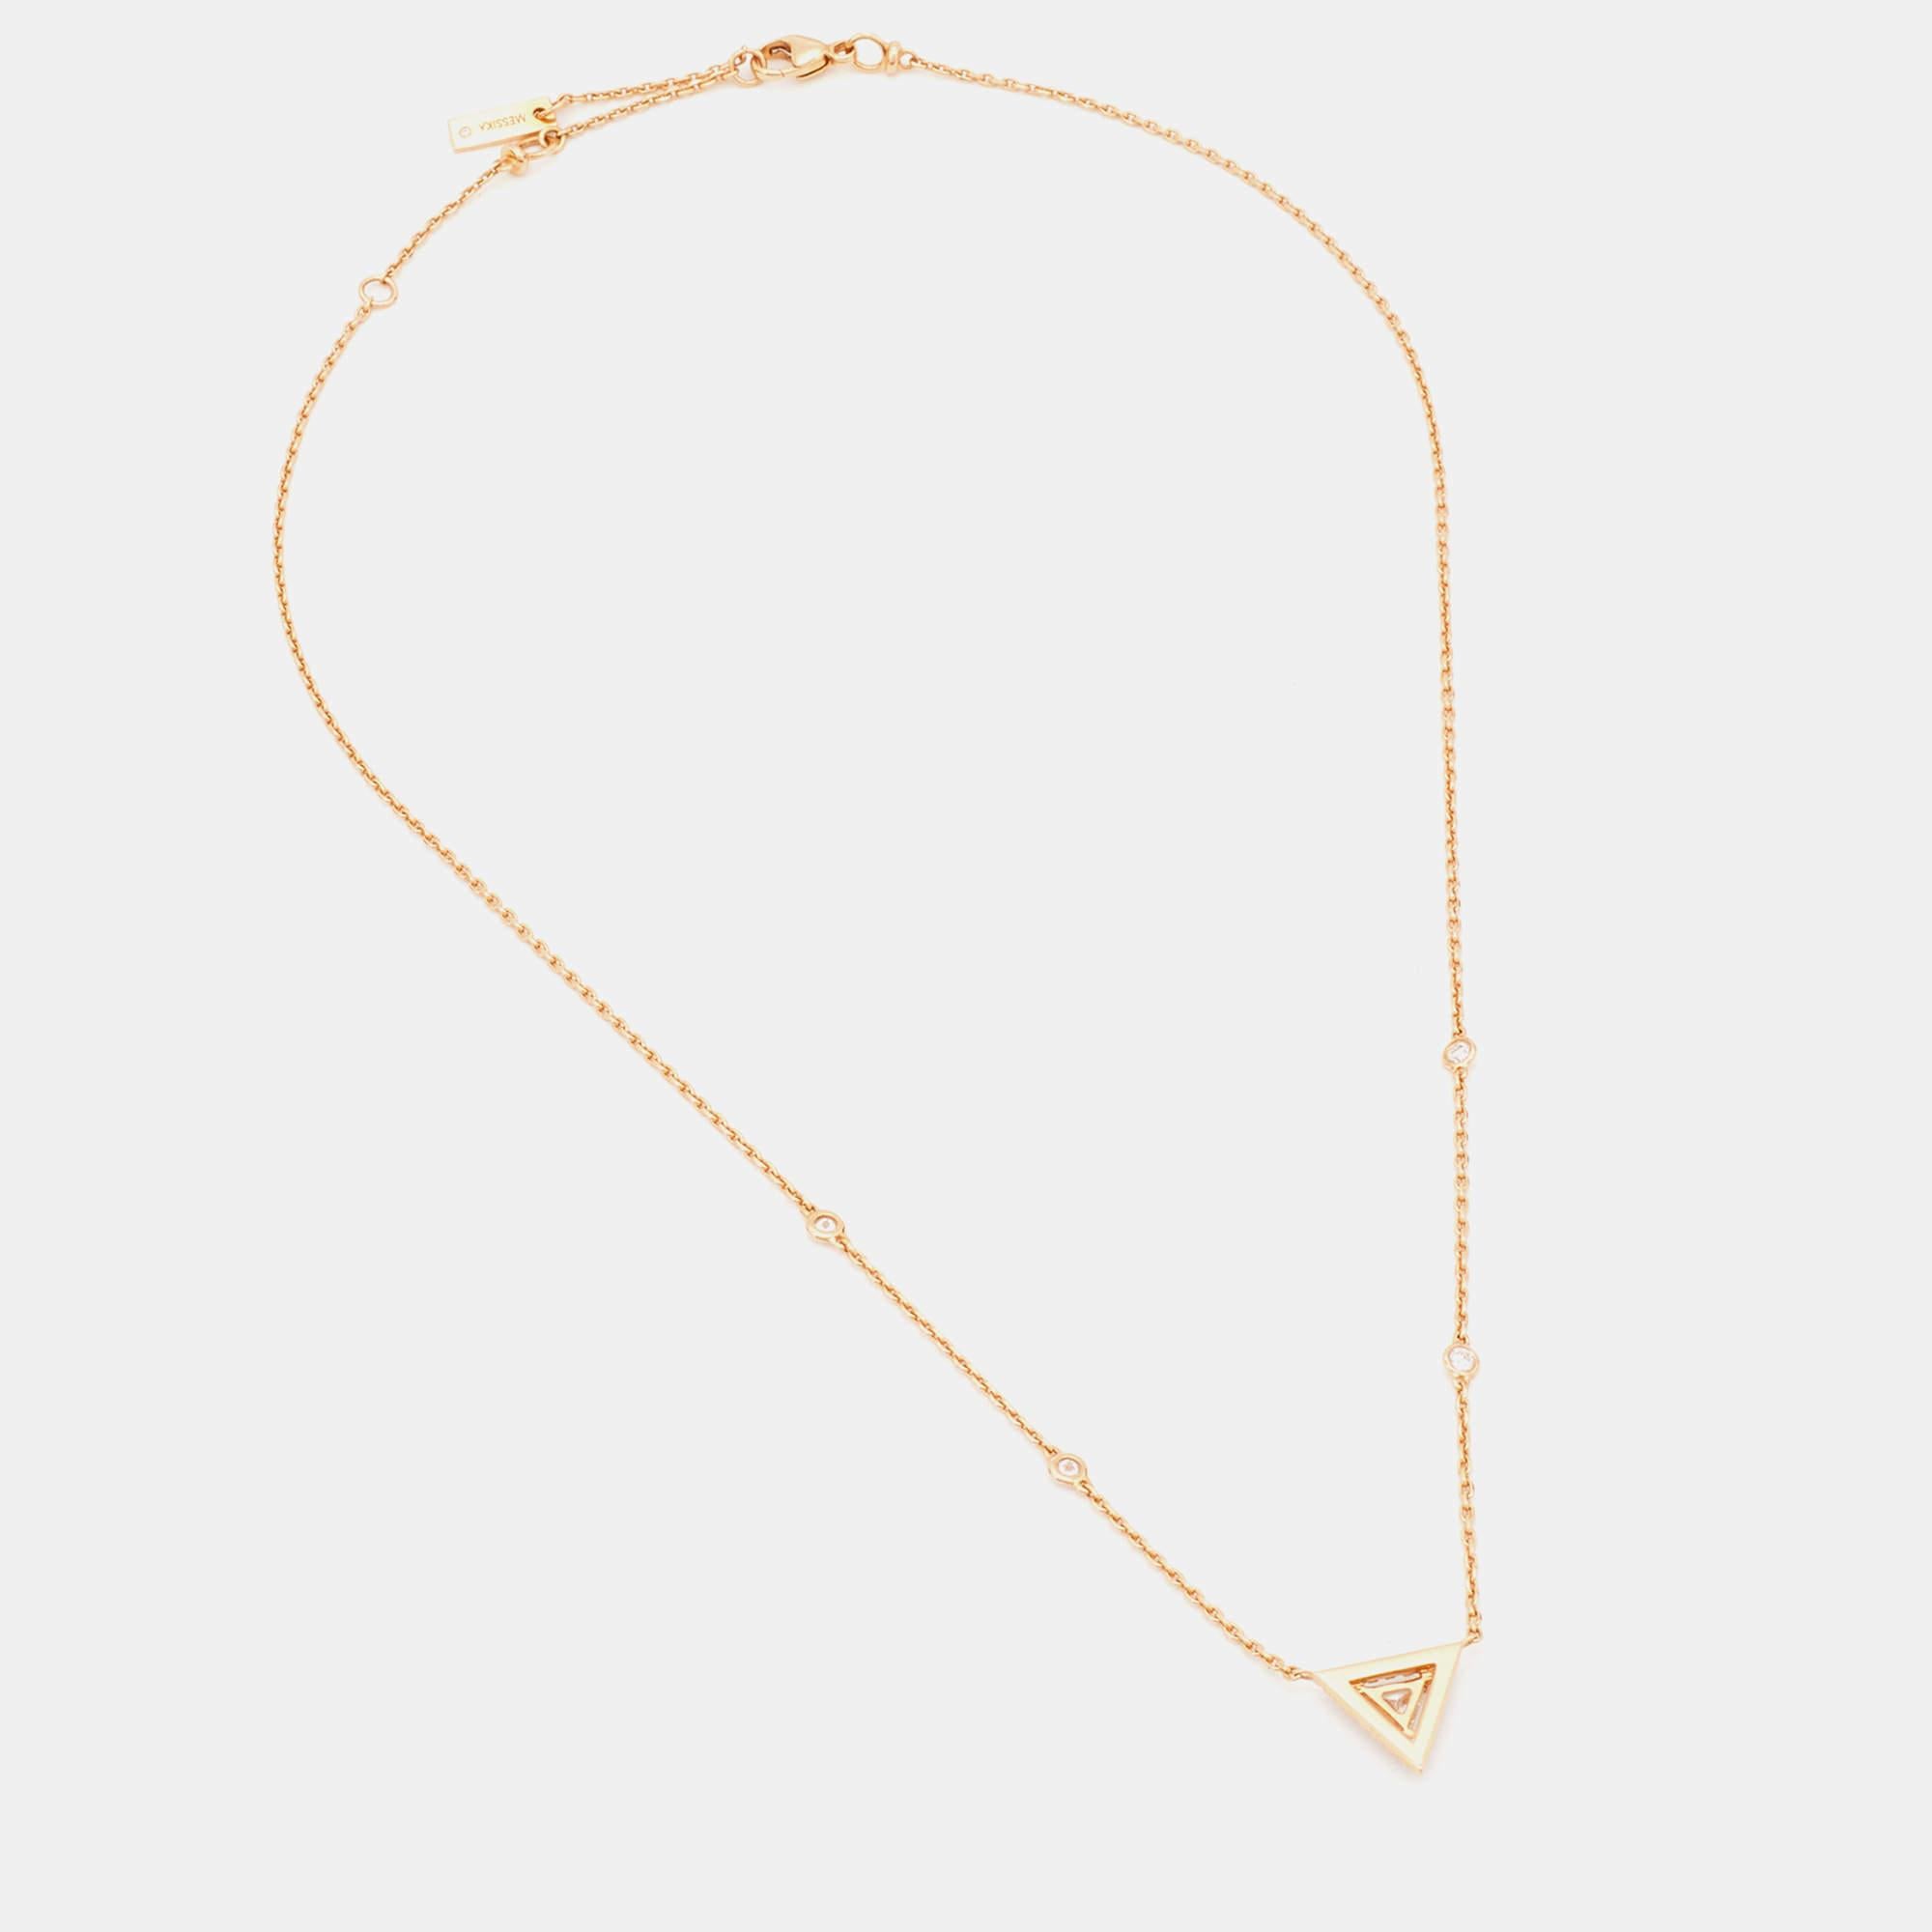 The fine workmanship, use of precious metals, and unique appeal make this designer necklace for women a fabulous purchase. It's a worthy investment.

Includes: Original Box, Original Case

